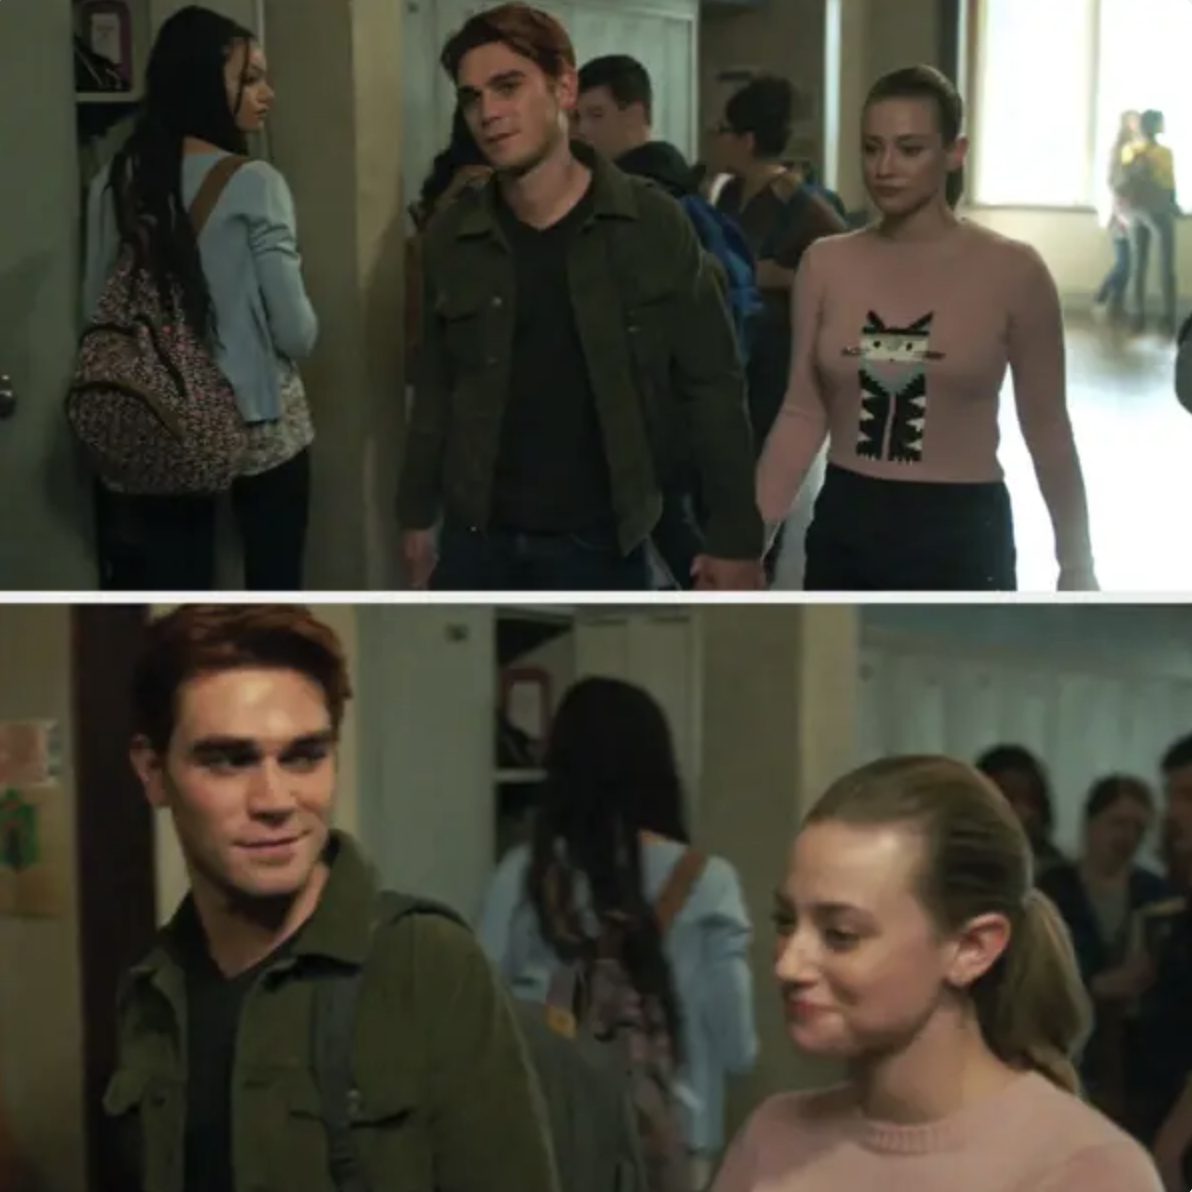 Archie and Betty holding hands and walking down a school hallway